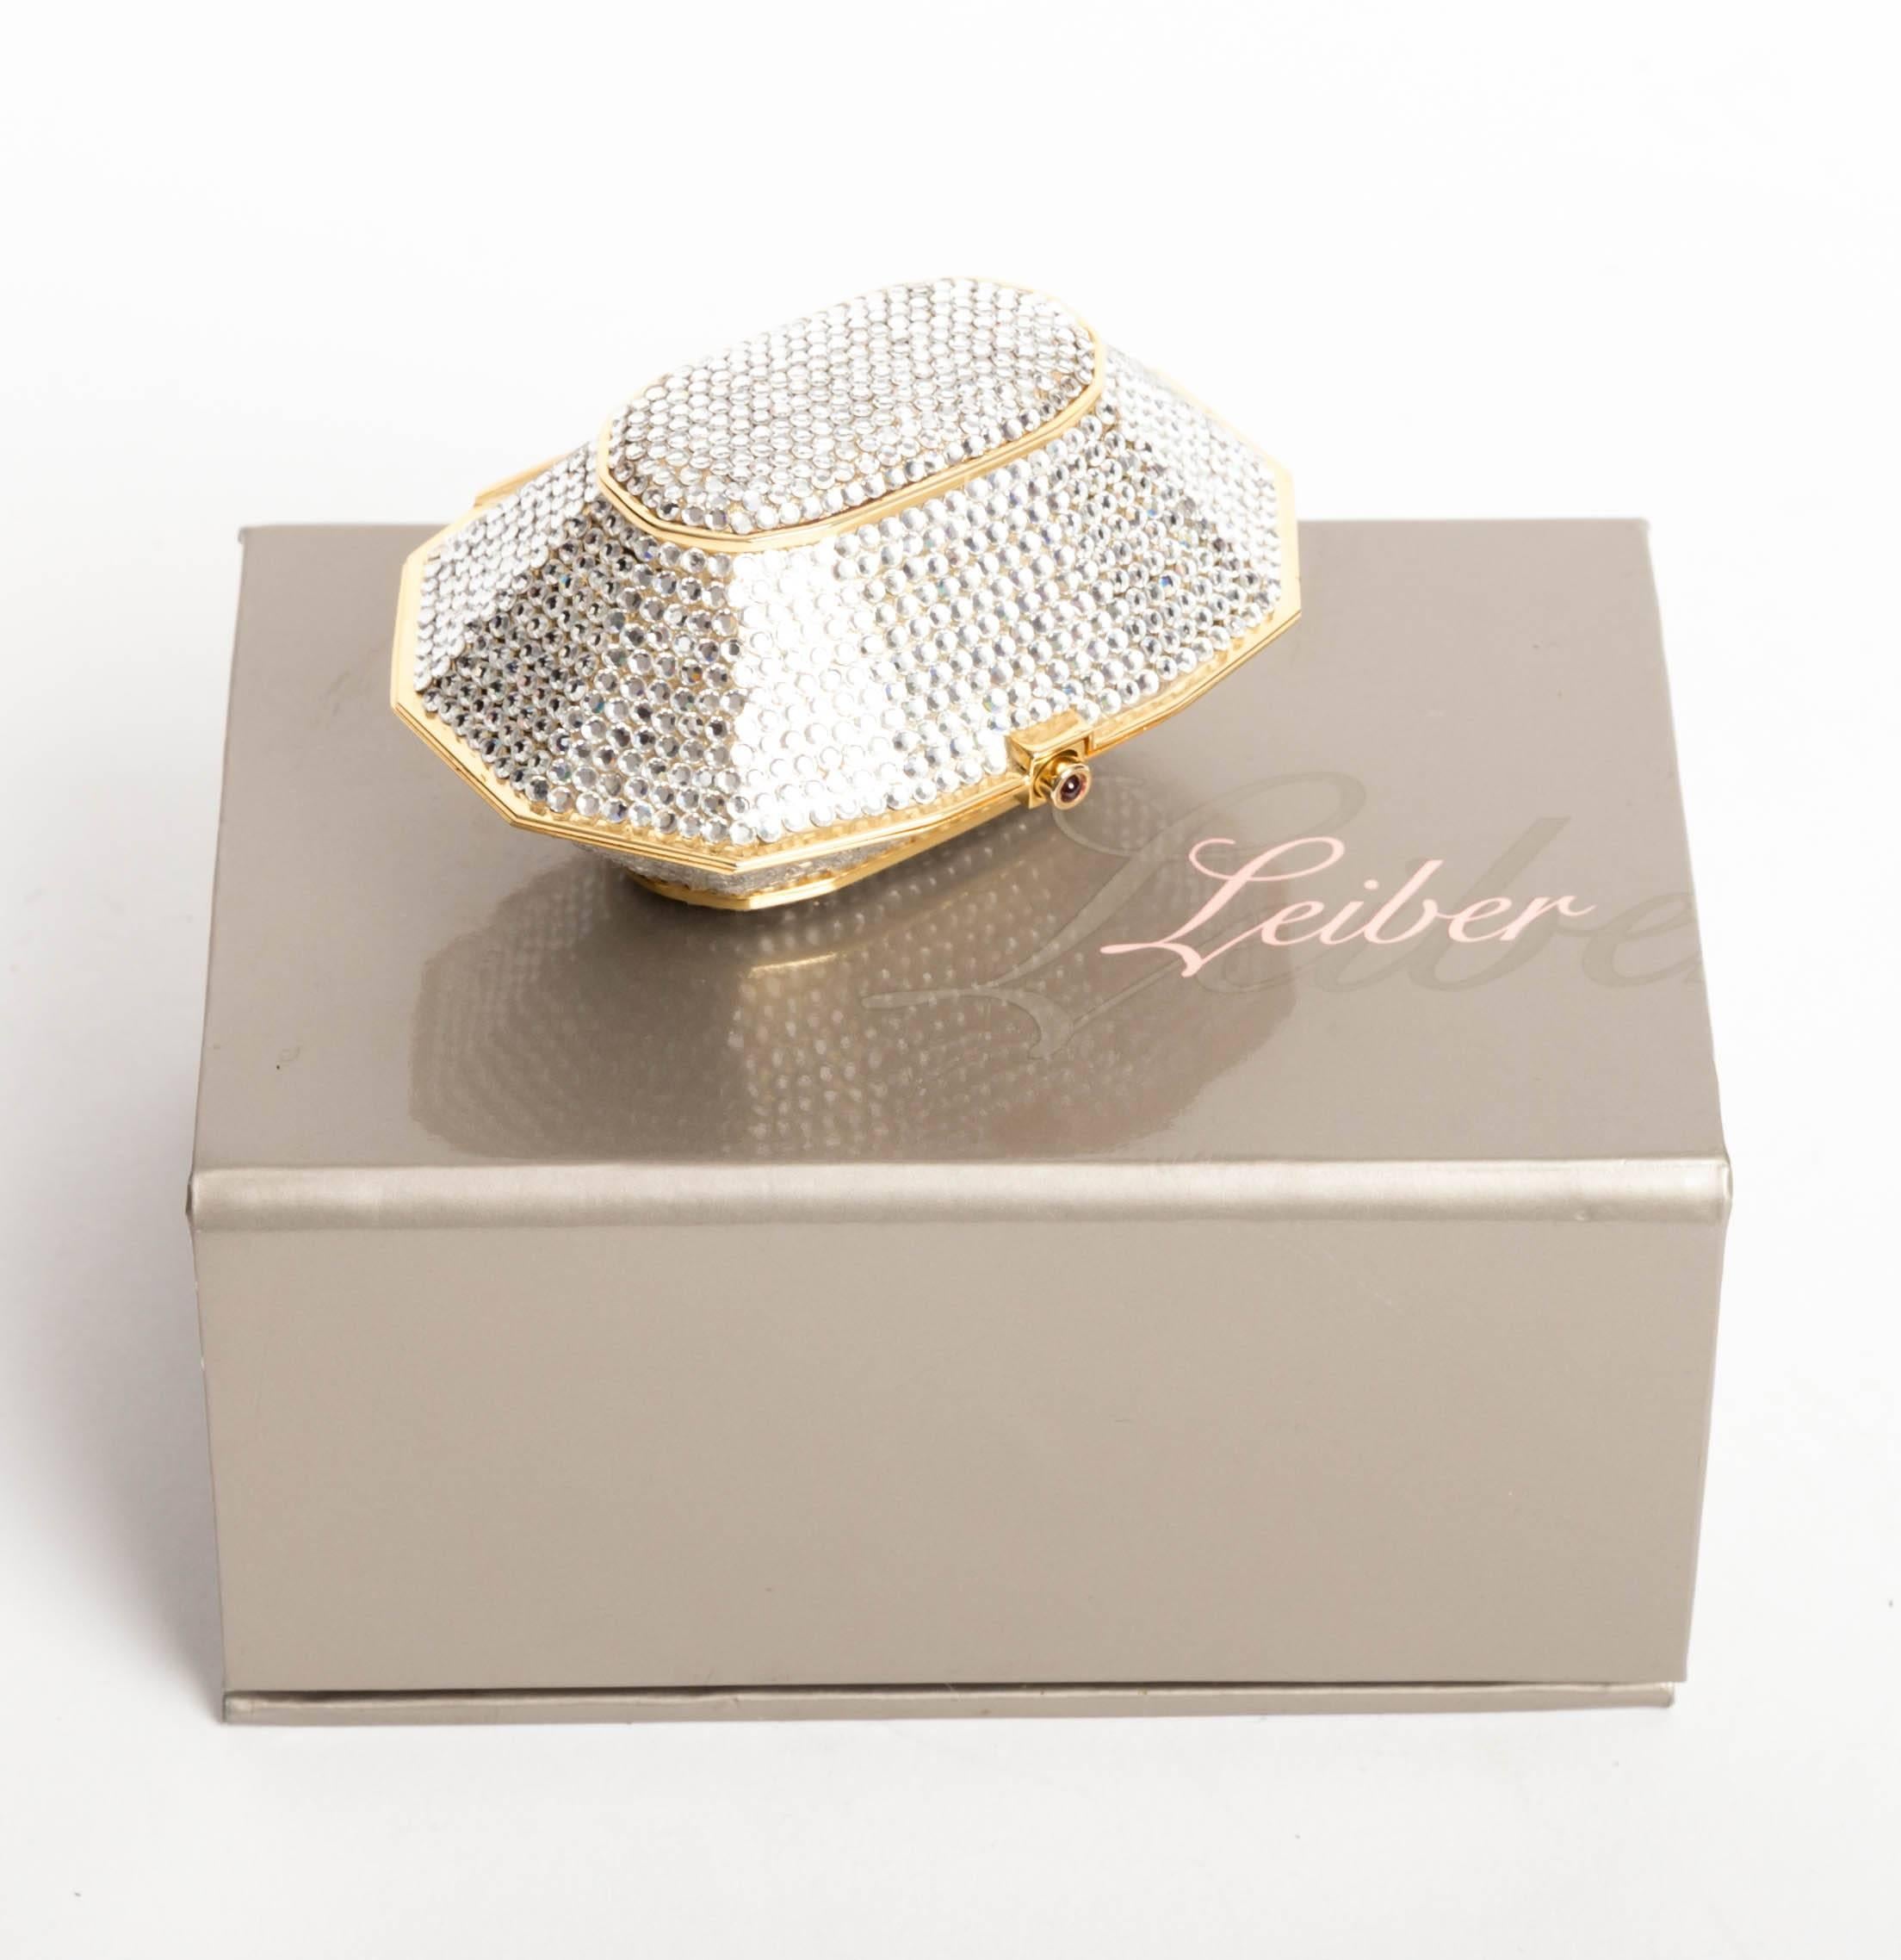 Stunning Judith Leiber Crystal Pill Box with Quartz Cabochon Clasp and Lined with Gold Leather.
Immaculate condition. No missing stones.
Original Box is Included.